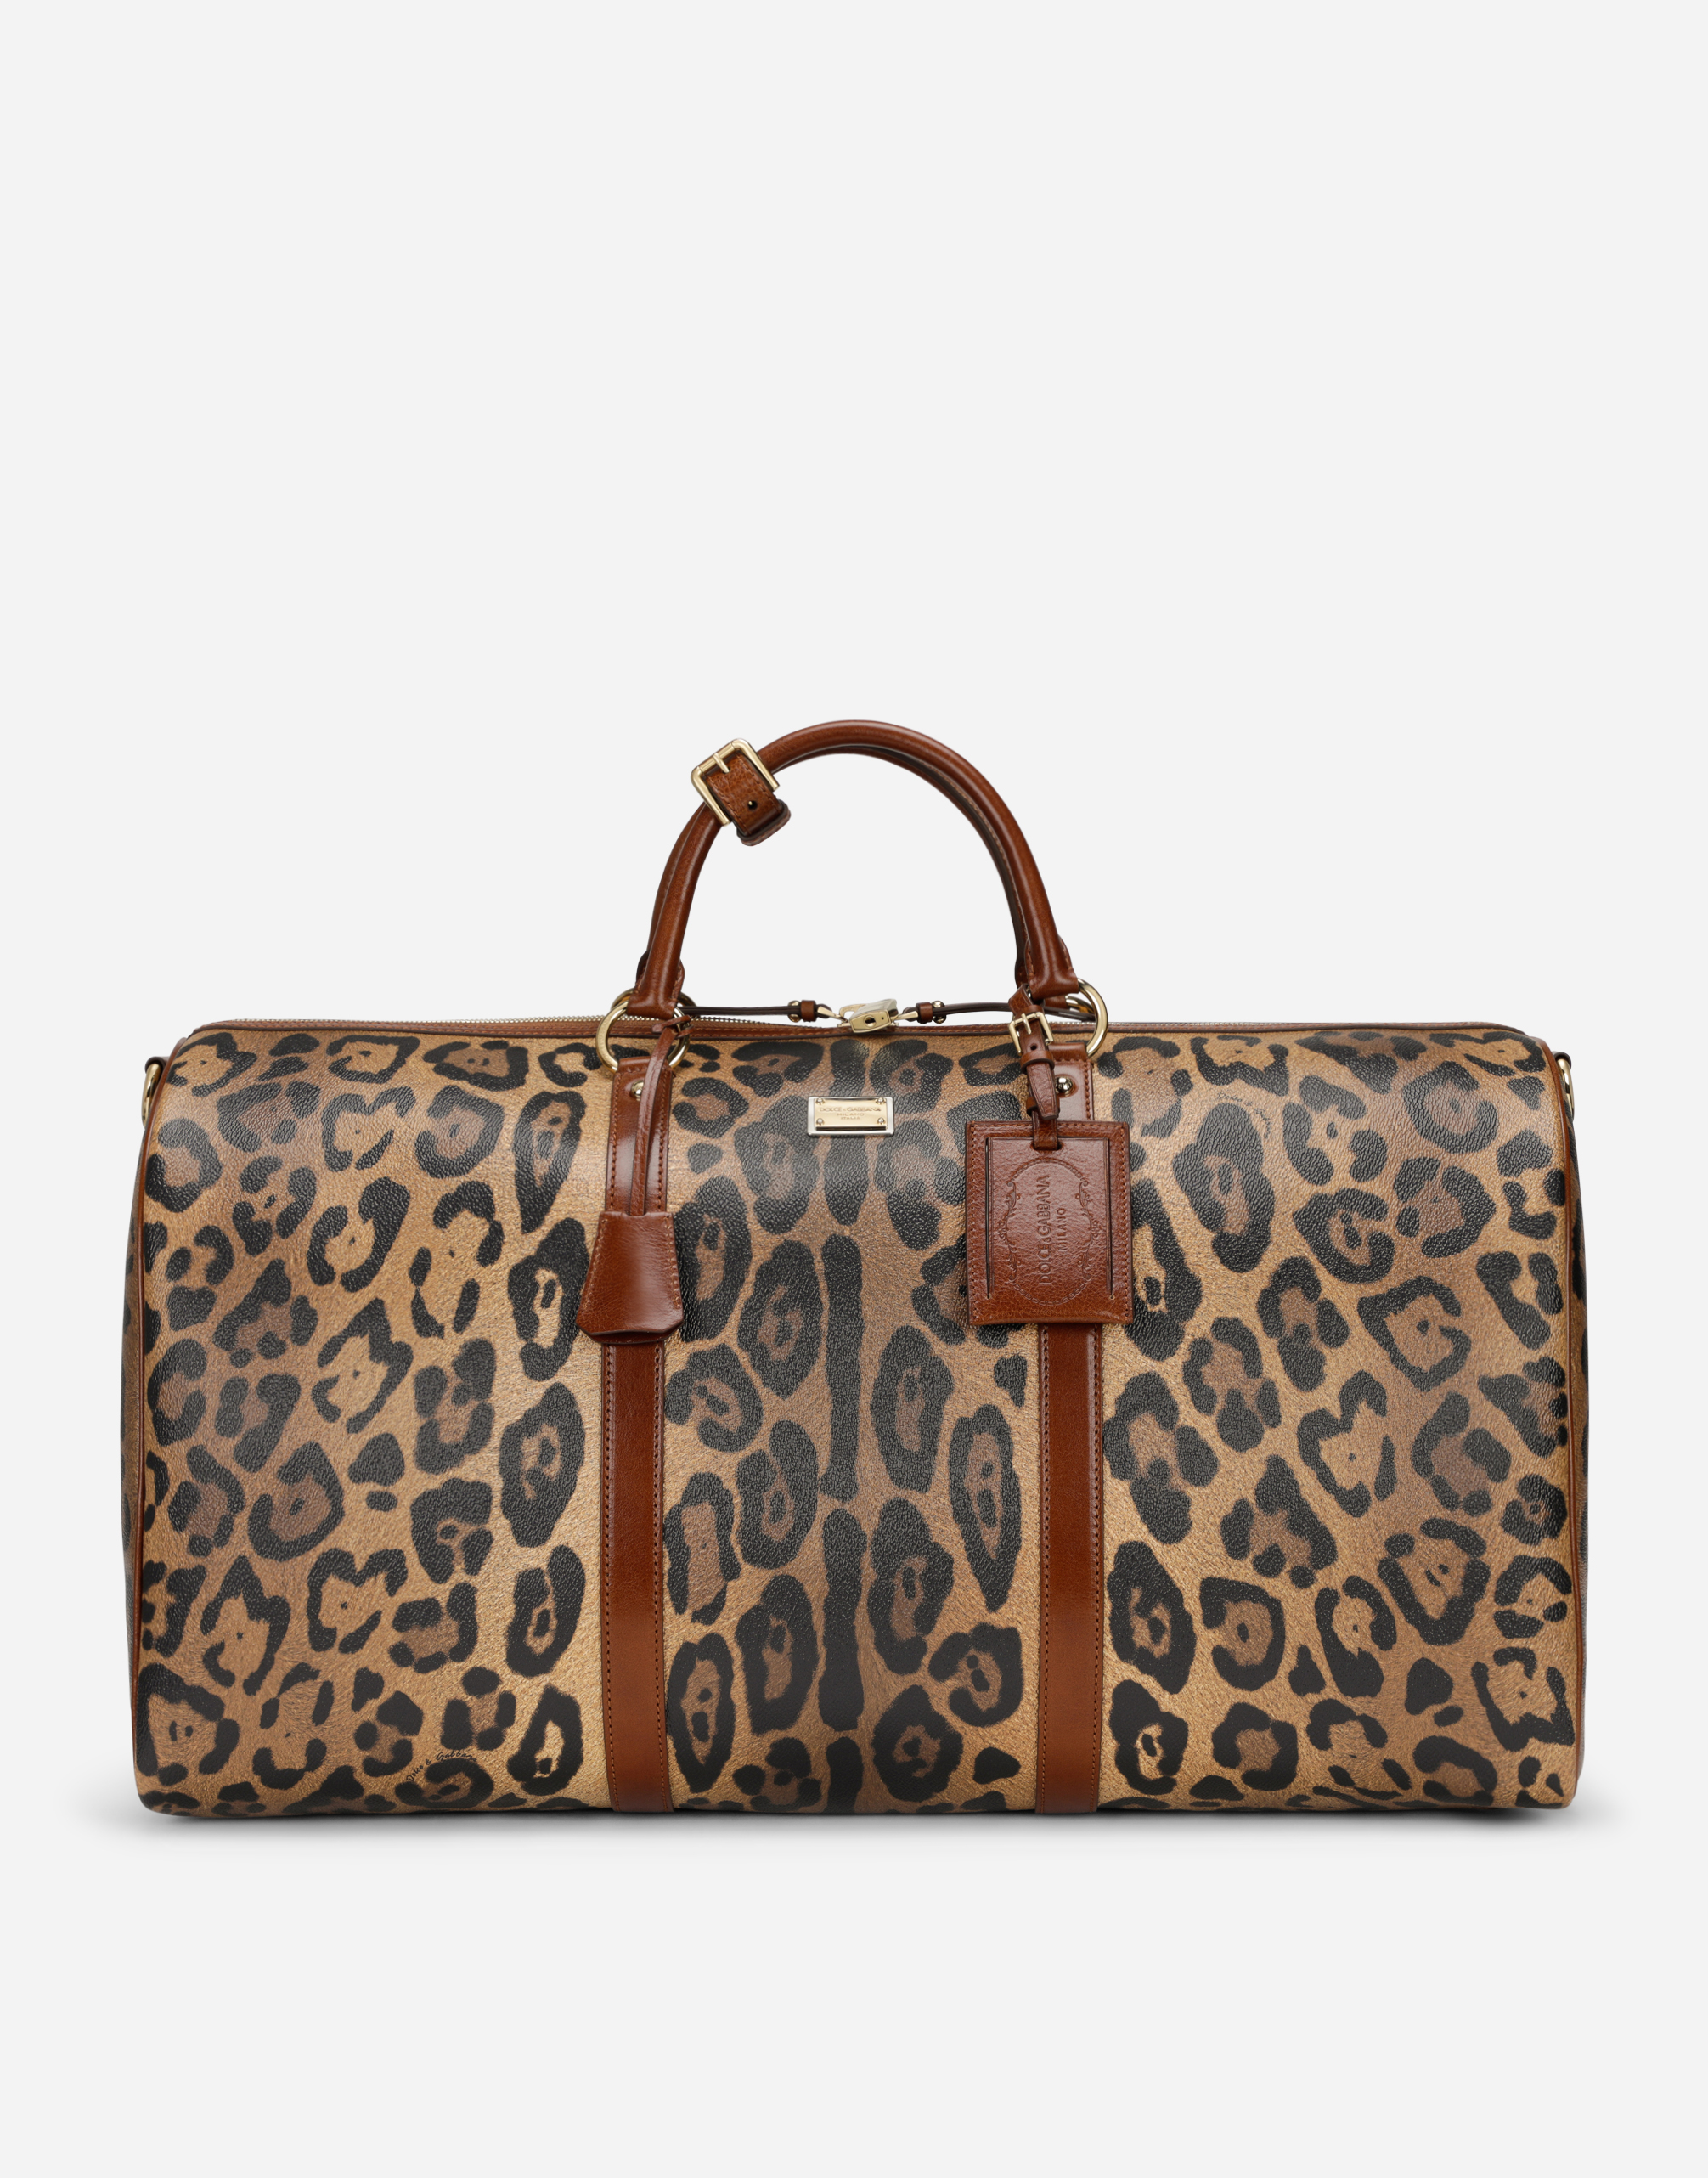 Medium travel bag in leopard-print Crespo with branded plate in Multicolor